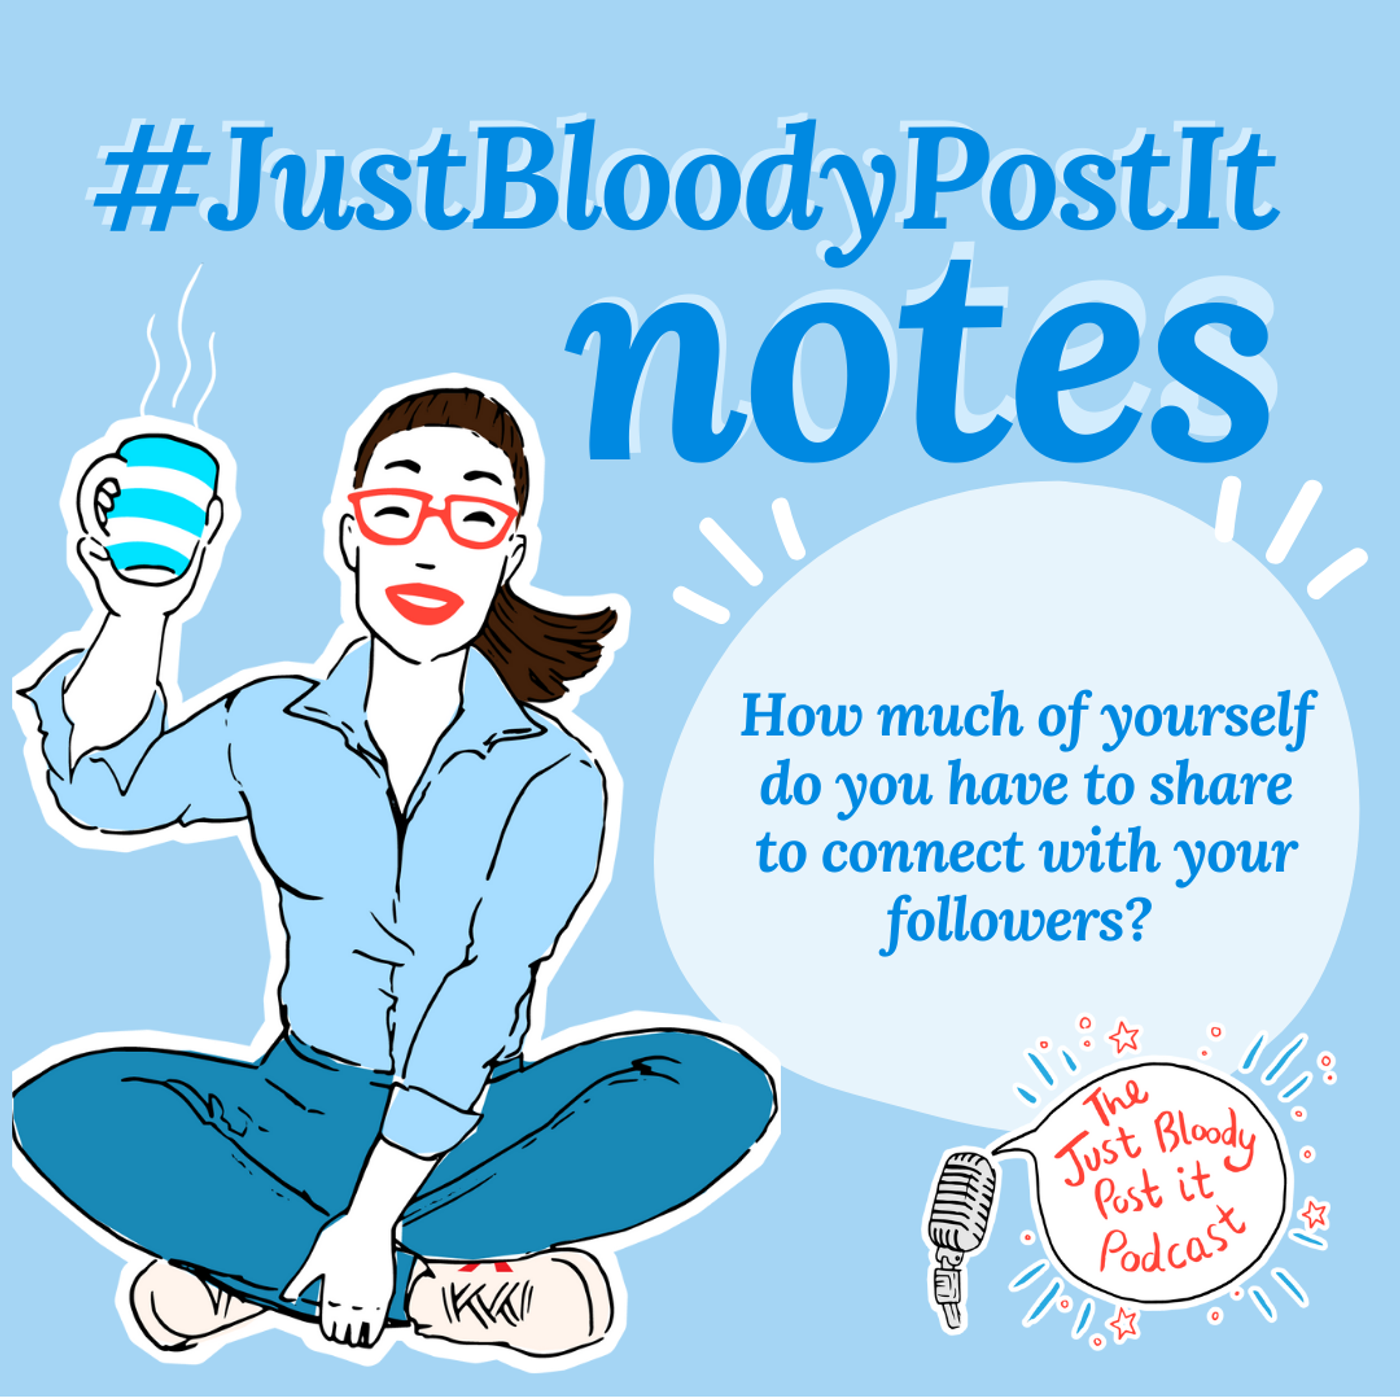 S2 Ep13: #JustBloodyPostIt note: How much of yourself do you have to share to connect with your followers?